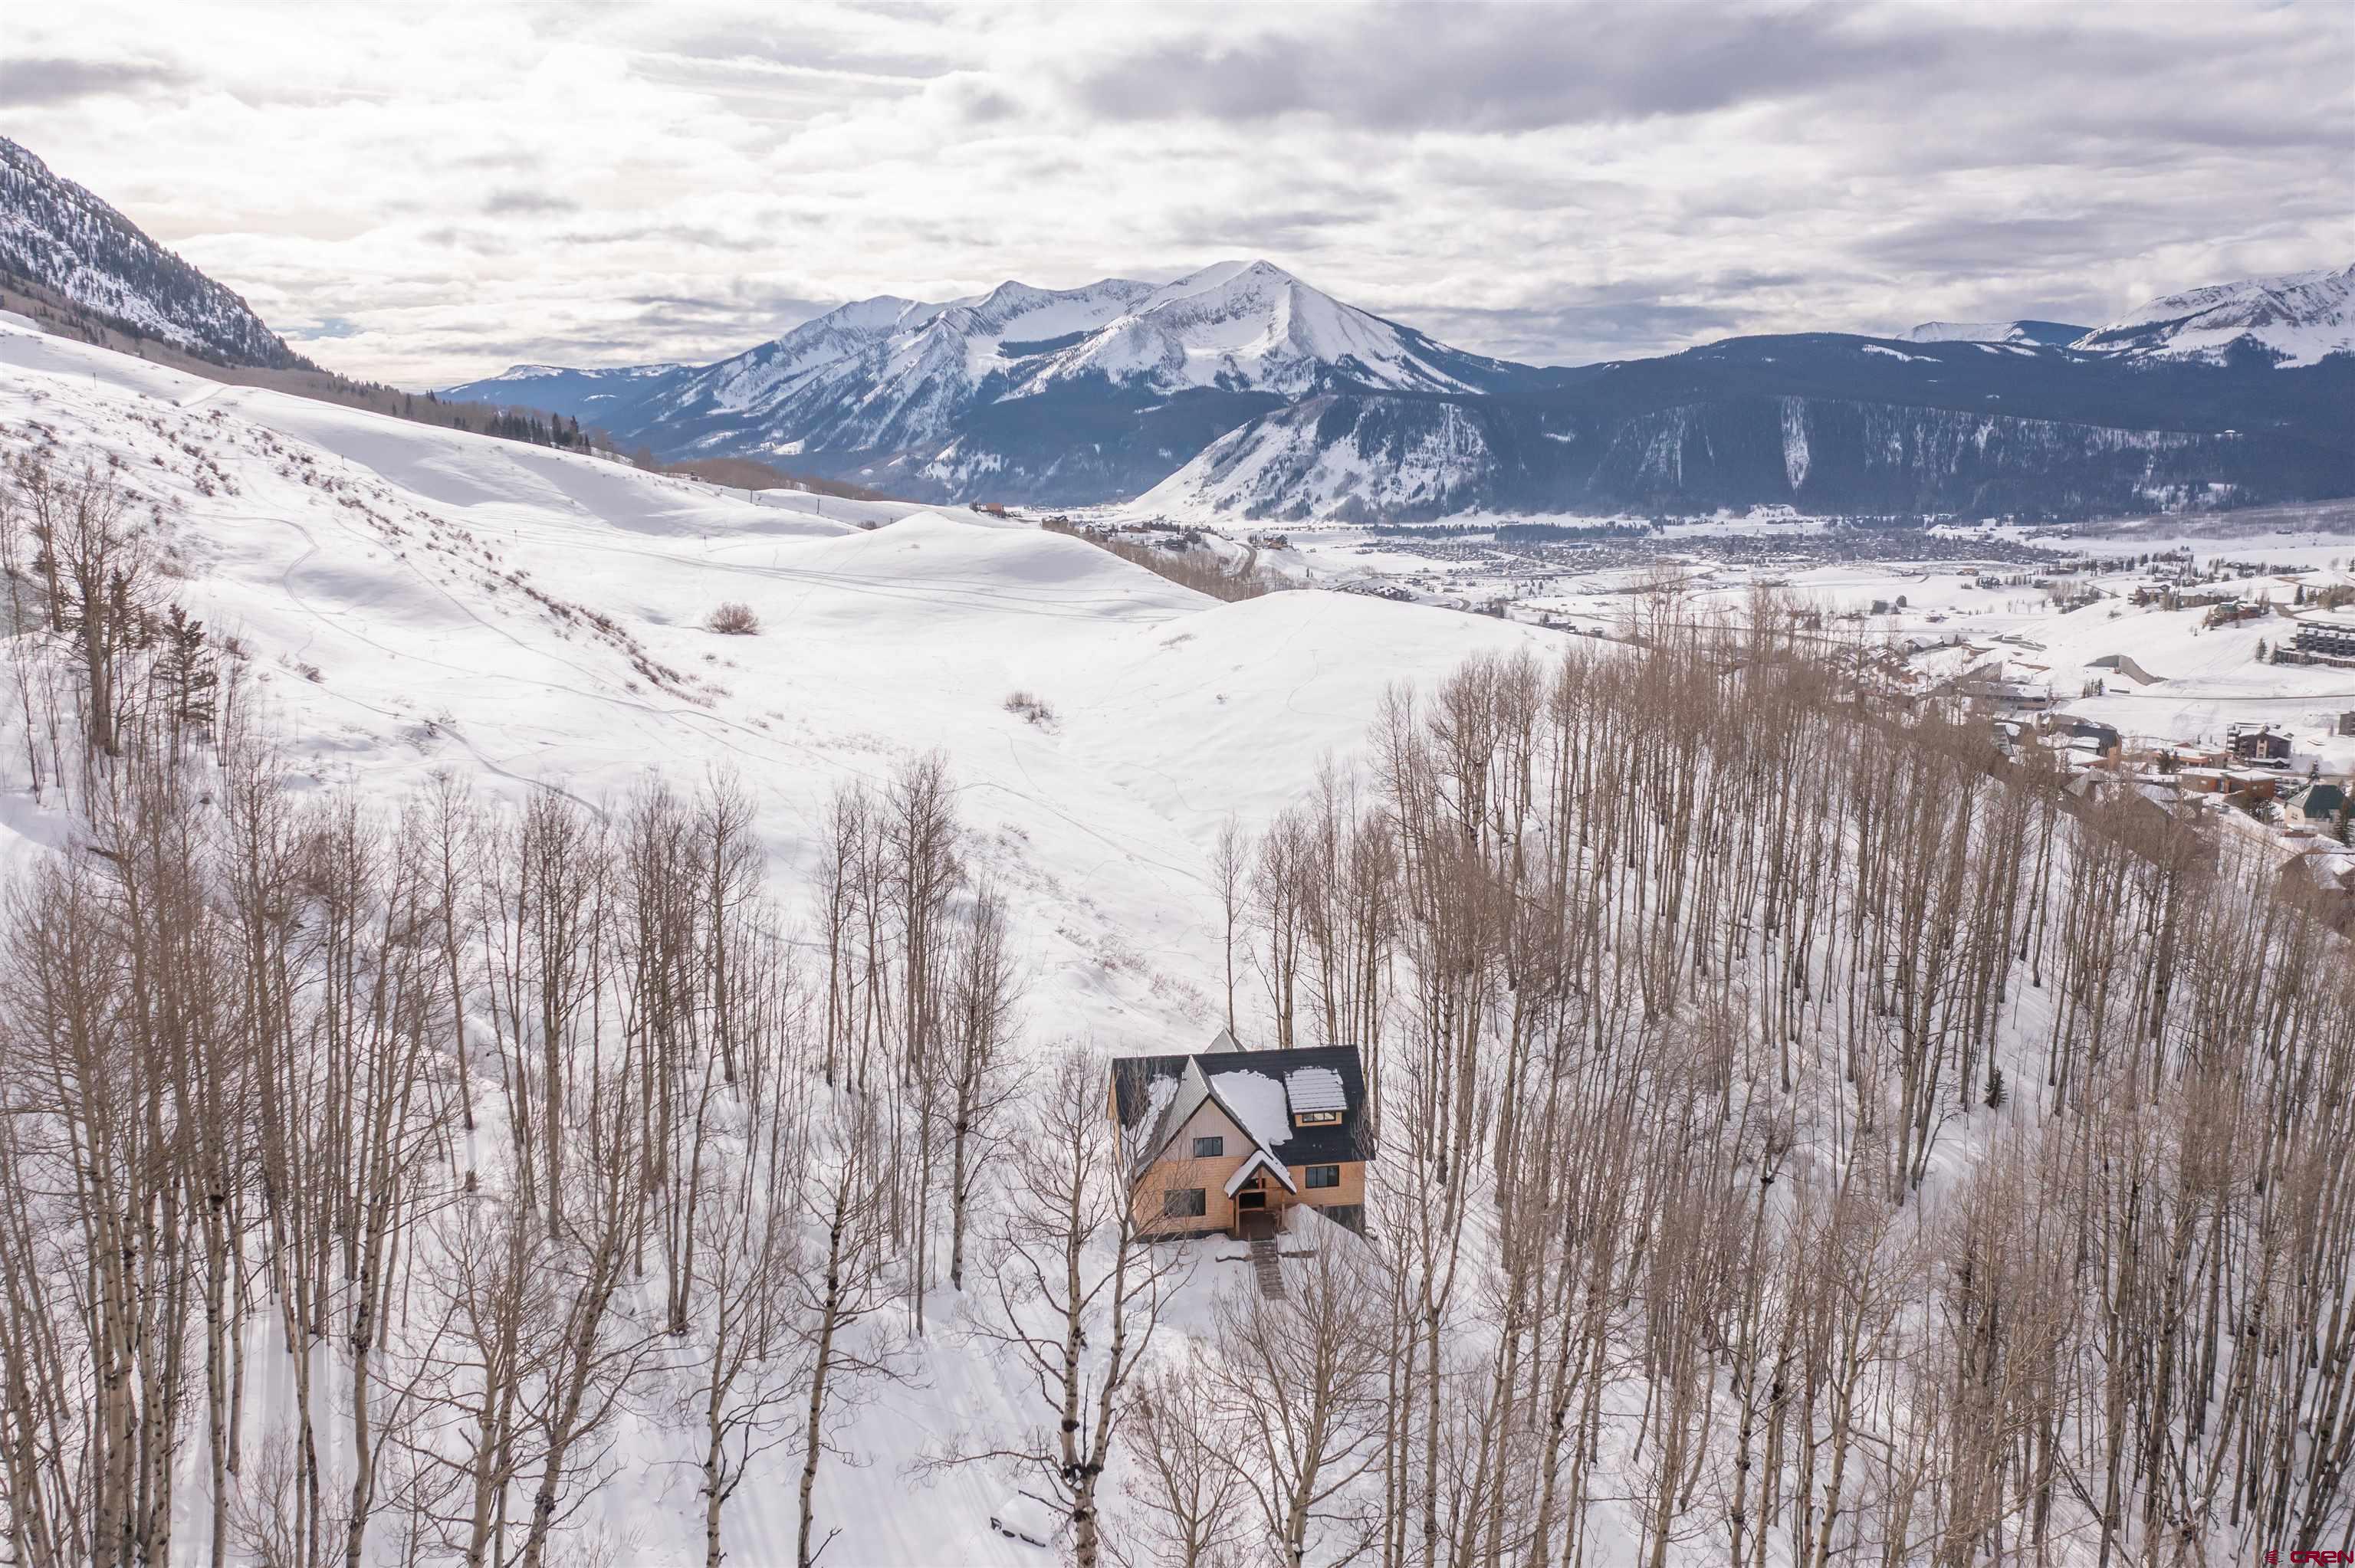 42 Ruby Drive, Mt. Crested Butte, CO 